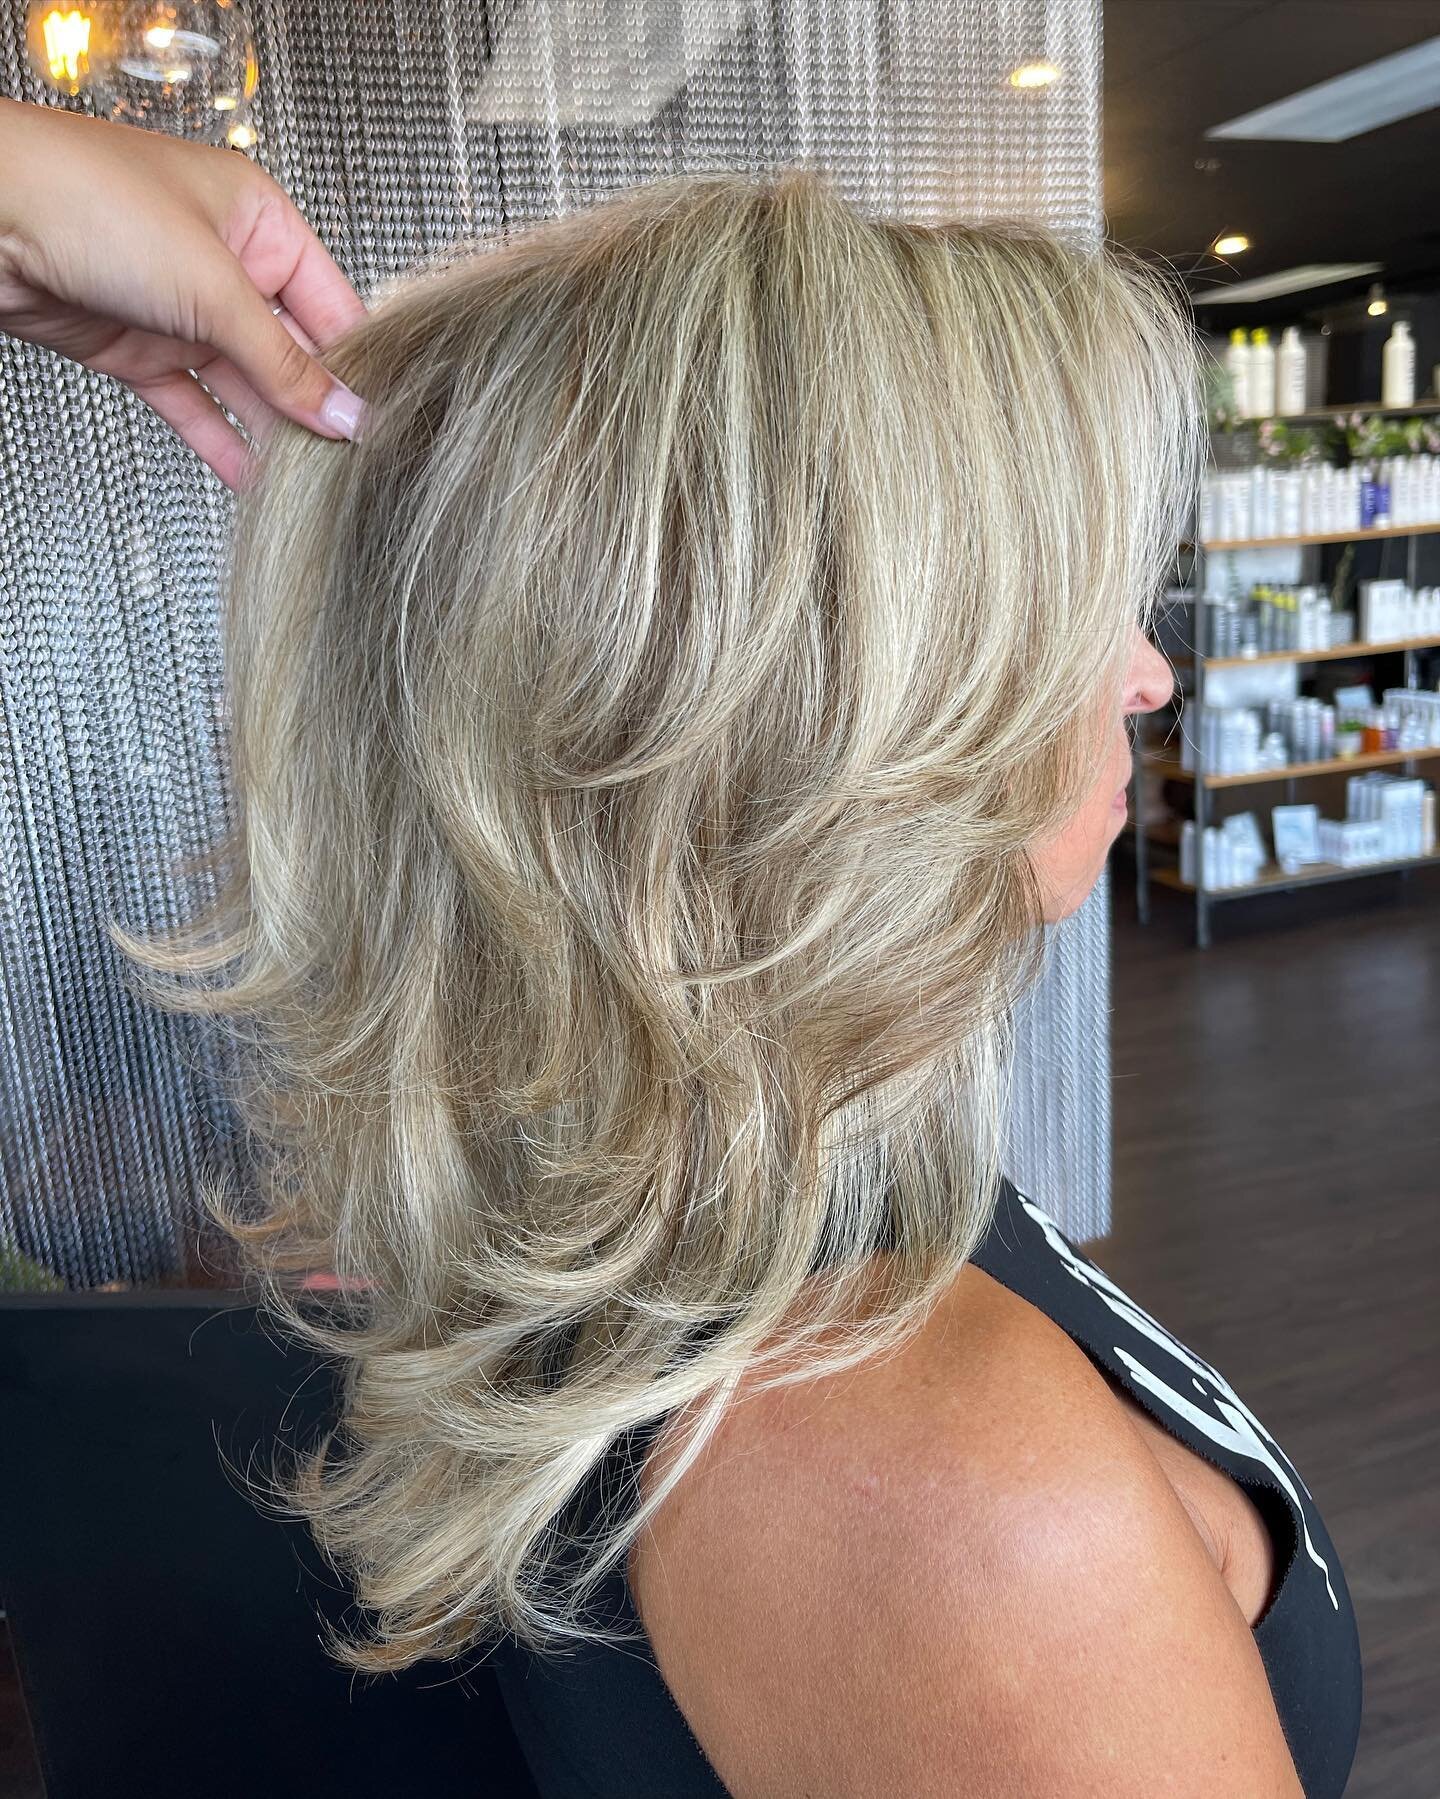 Bouncy Blowout done by Lyza! @lyza.hair 
.
.
.
.
.
.
.
.
.
.
.

#lincolnpark  #lincolnparkhairdreser #lincolnparkstylist #morriscounty #morriscountystylist #morriscountyhairsalon #Pequannock #Pequannocksalon #Pequannockhair #Pequannockstylist  #Pompt